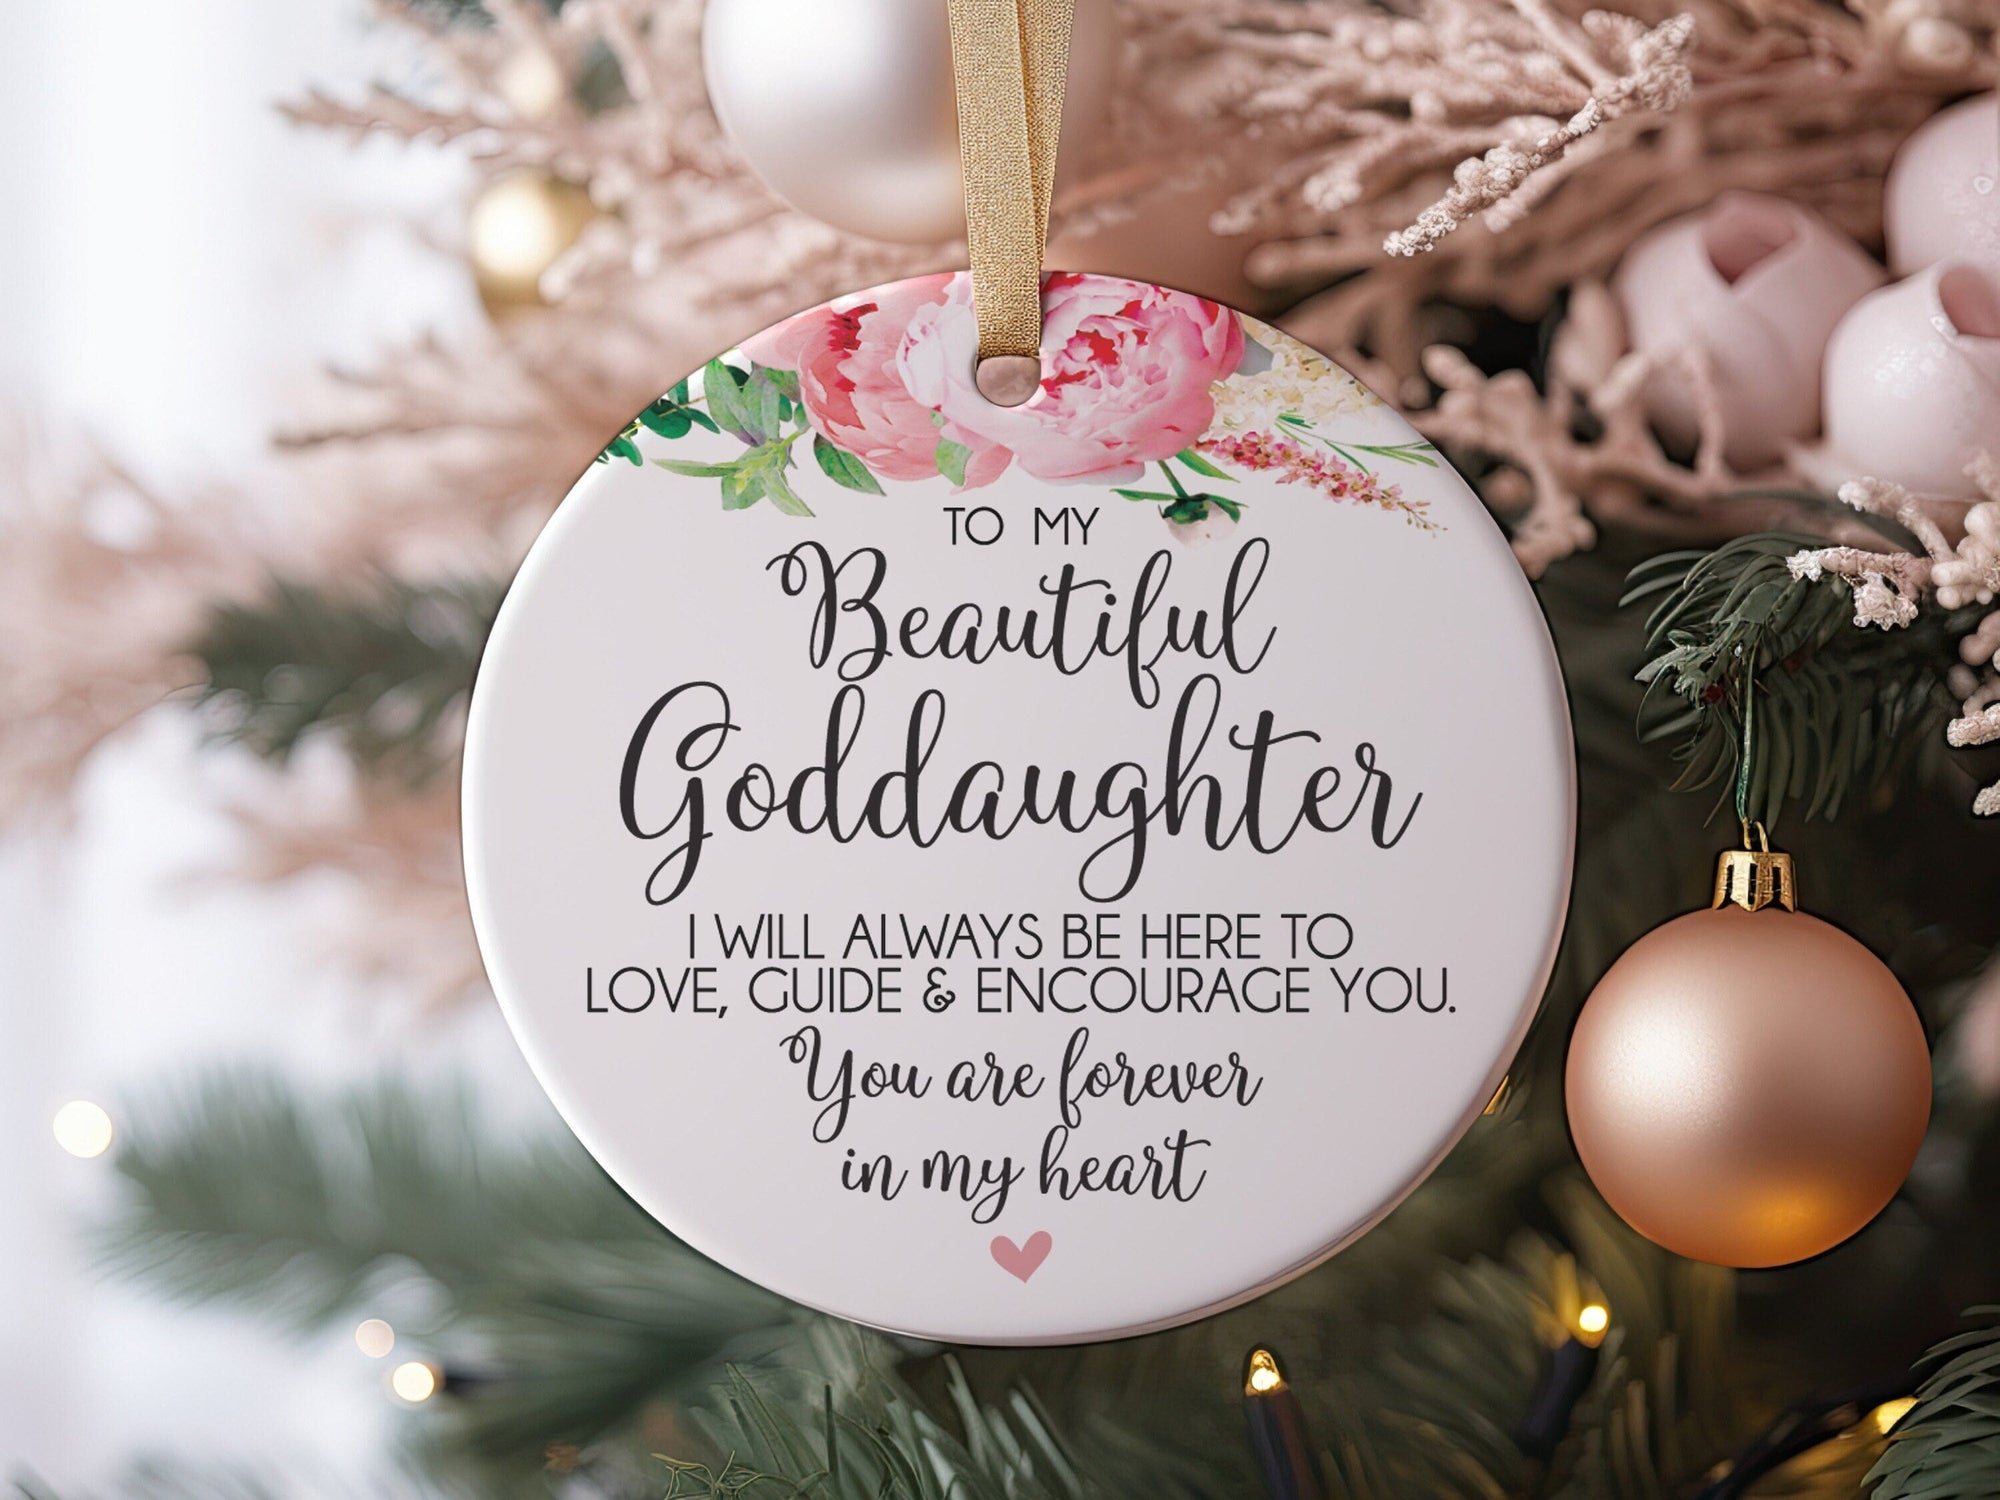 2023 To My Beautiful Goddaughter Gift Idea For From Godmother, Godfather or Godparent To God Daughter Ceramic Christmas Ornament